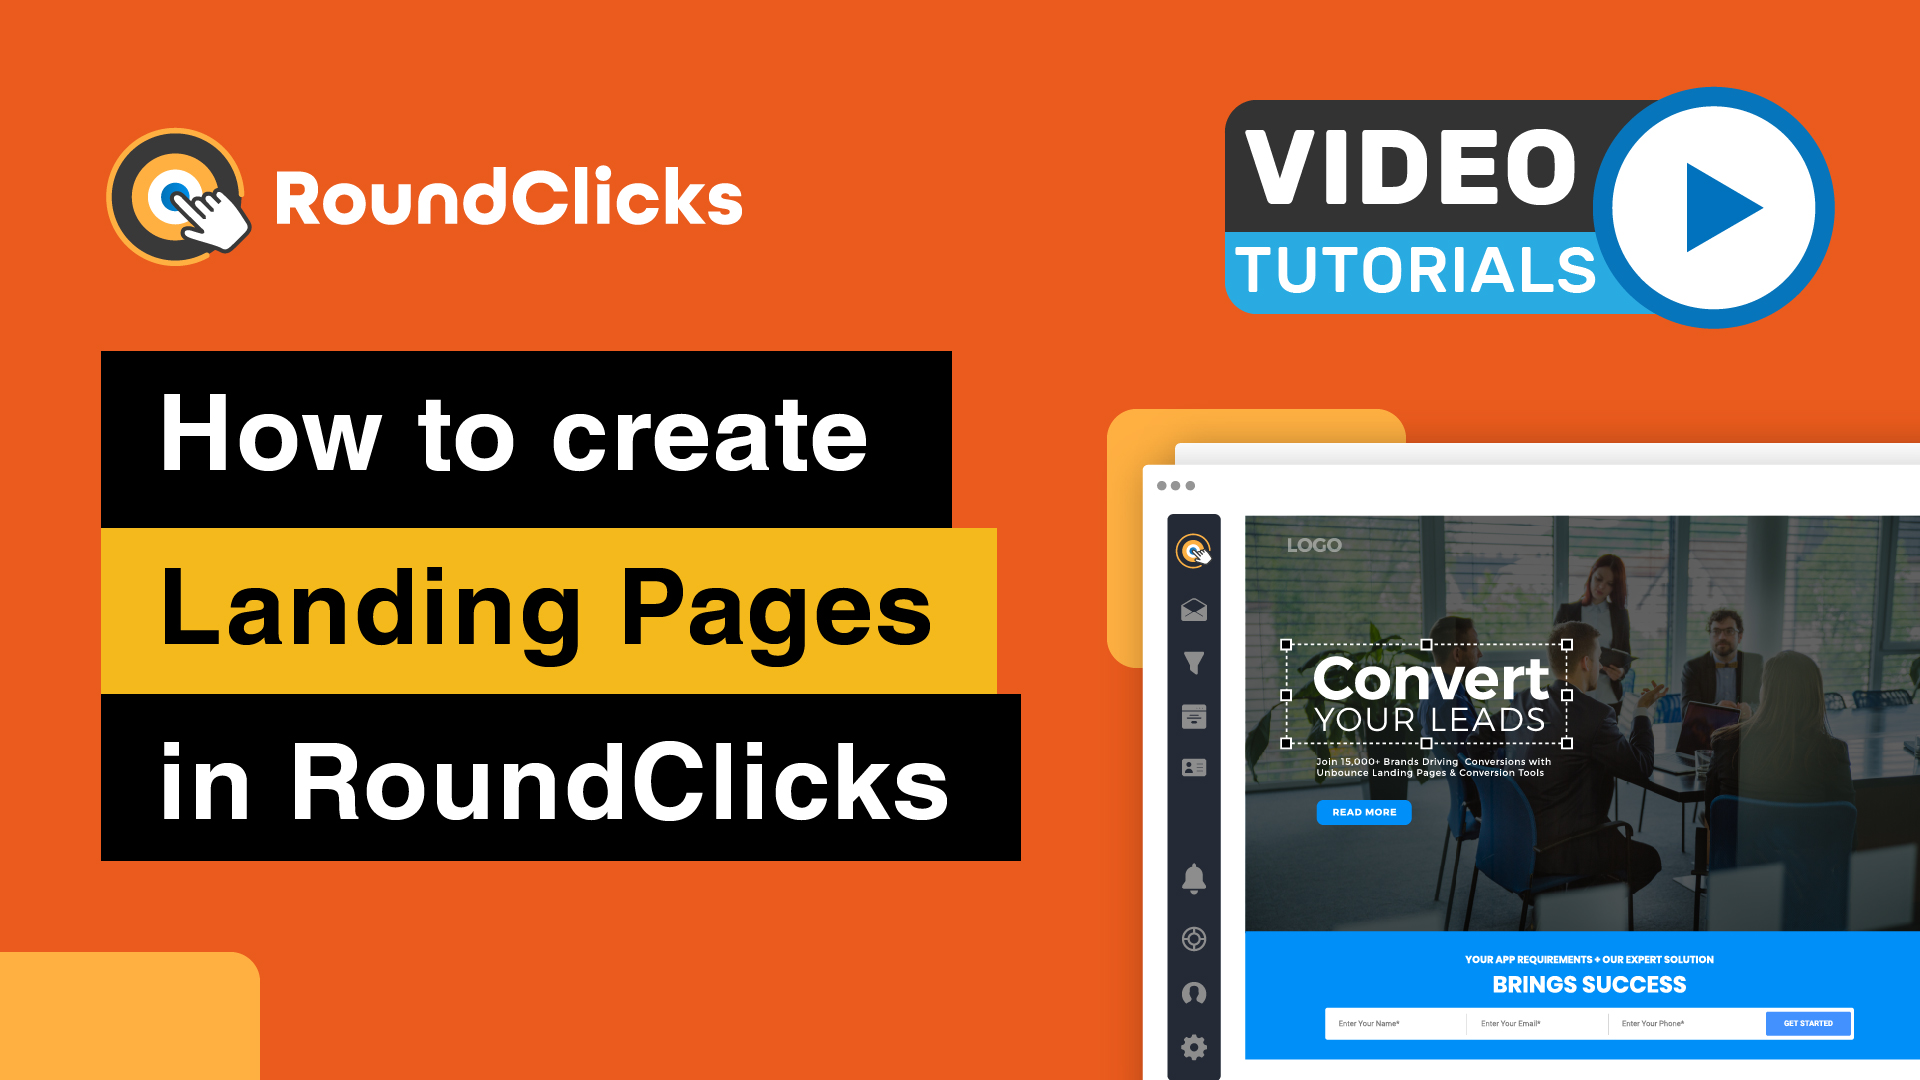 Learn to create landing pages in RoundClicks